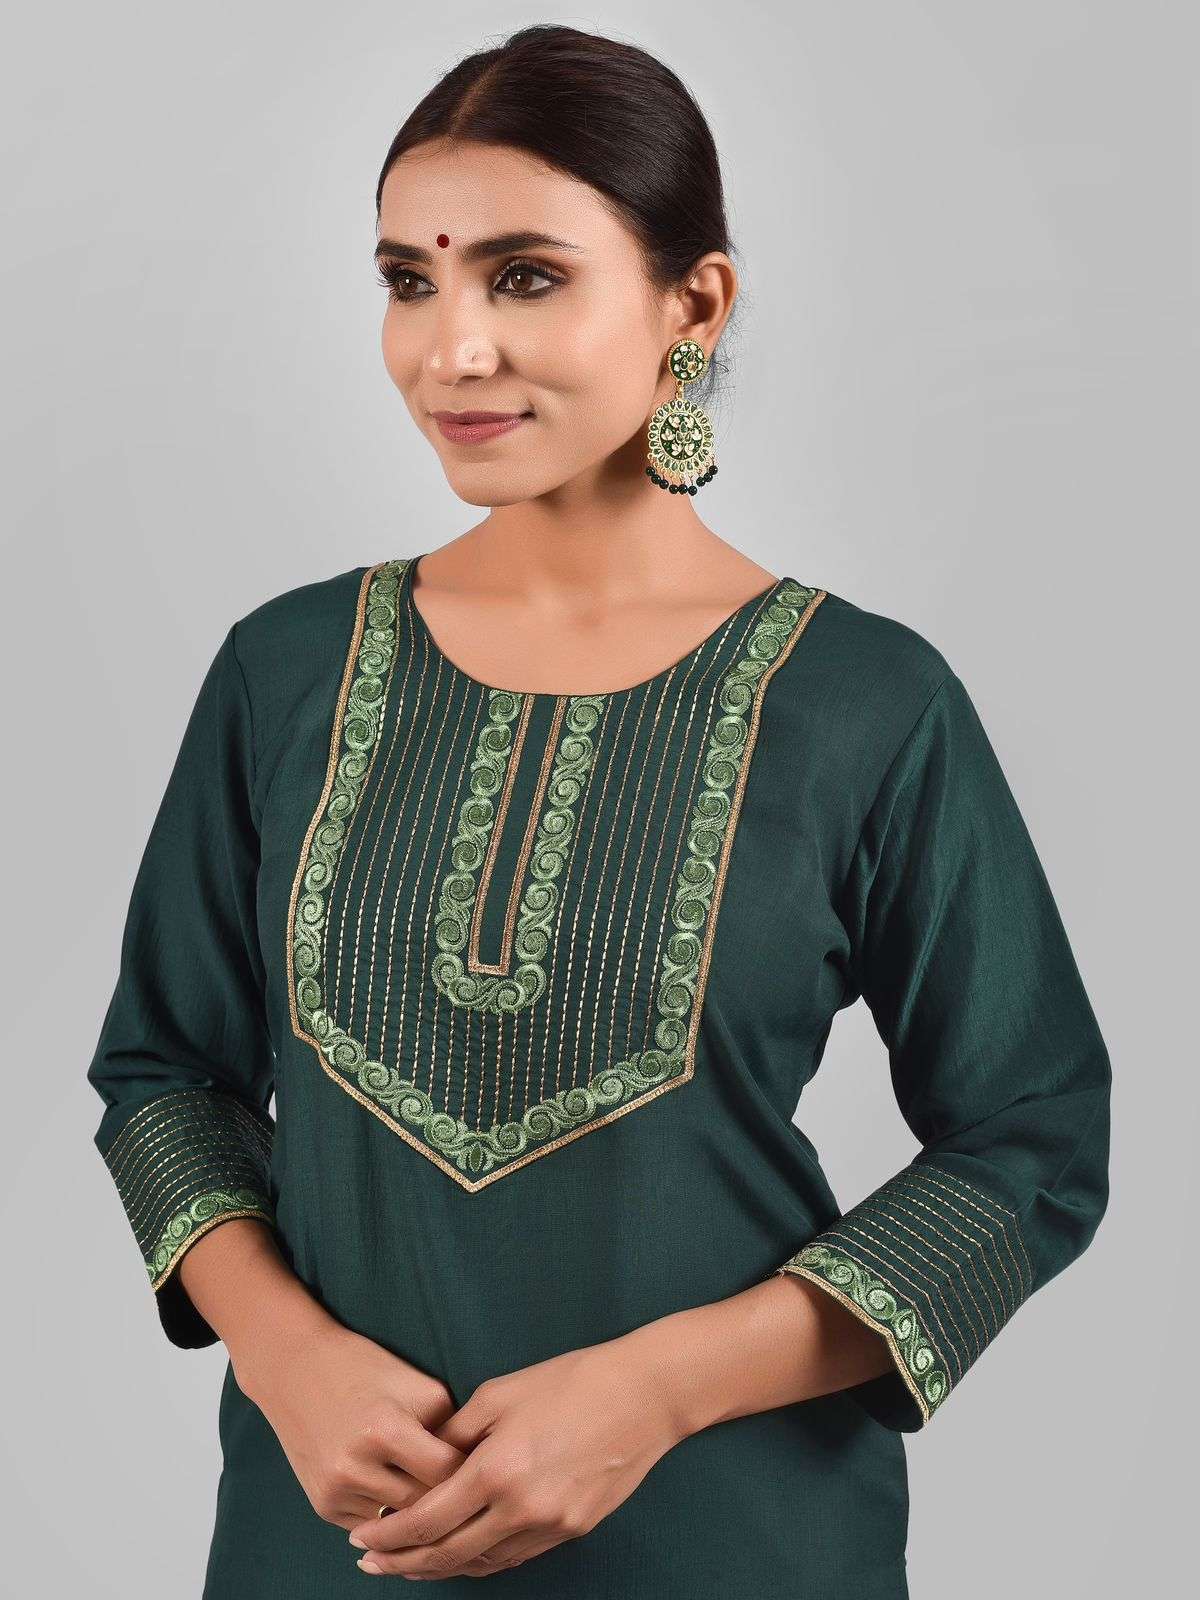 channel 9 1109 to 1112 series stylish designer kurti catalogue collection 2022